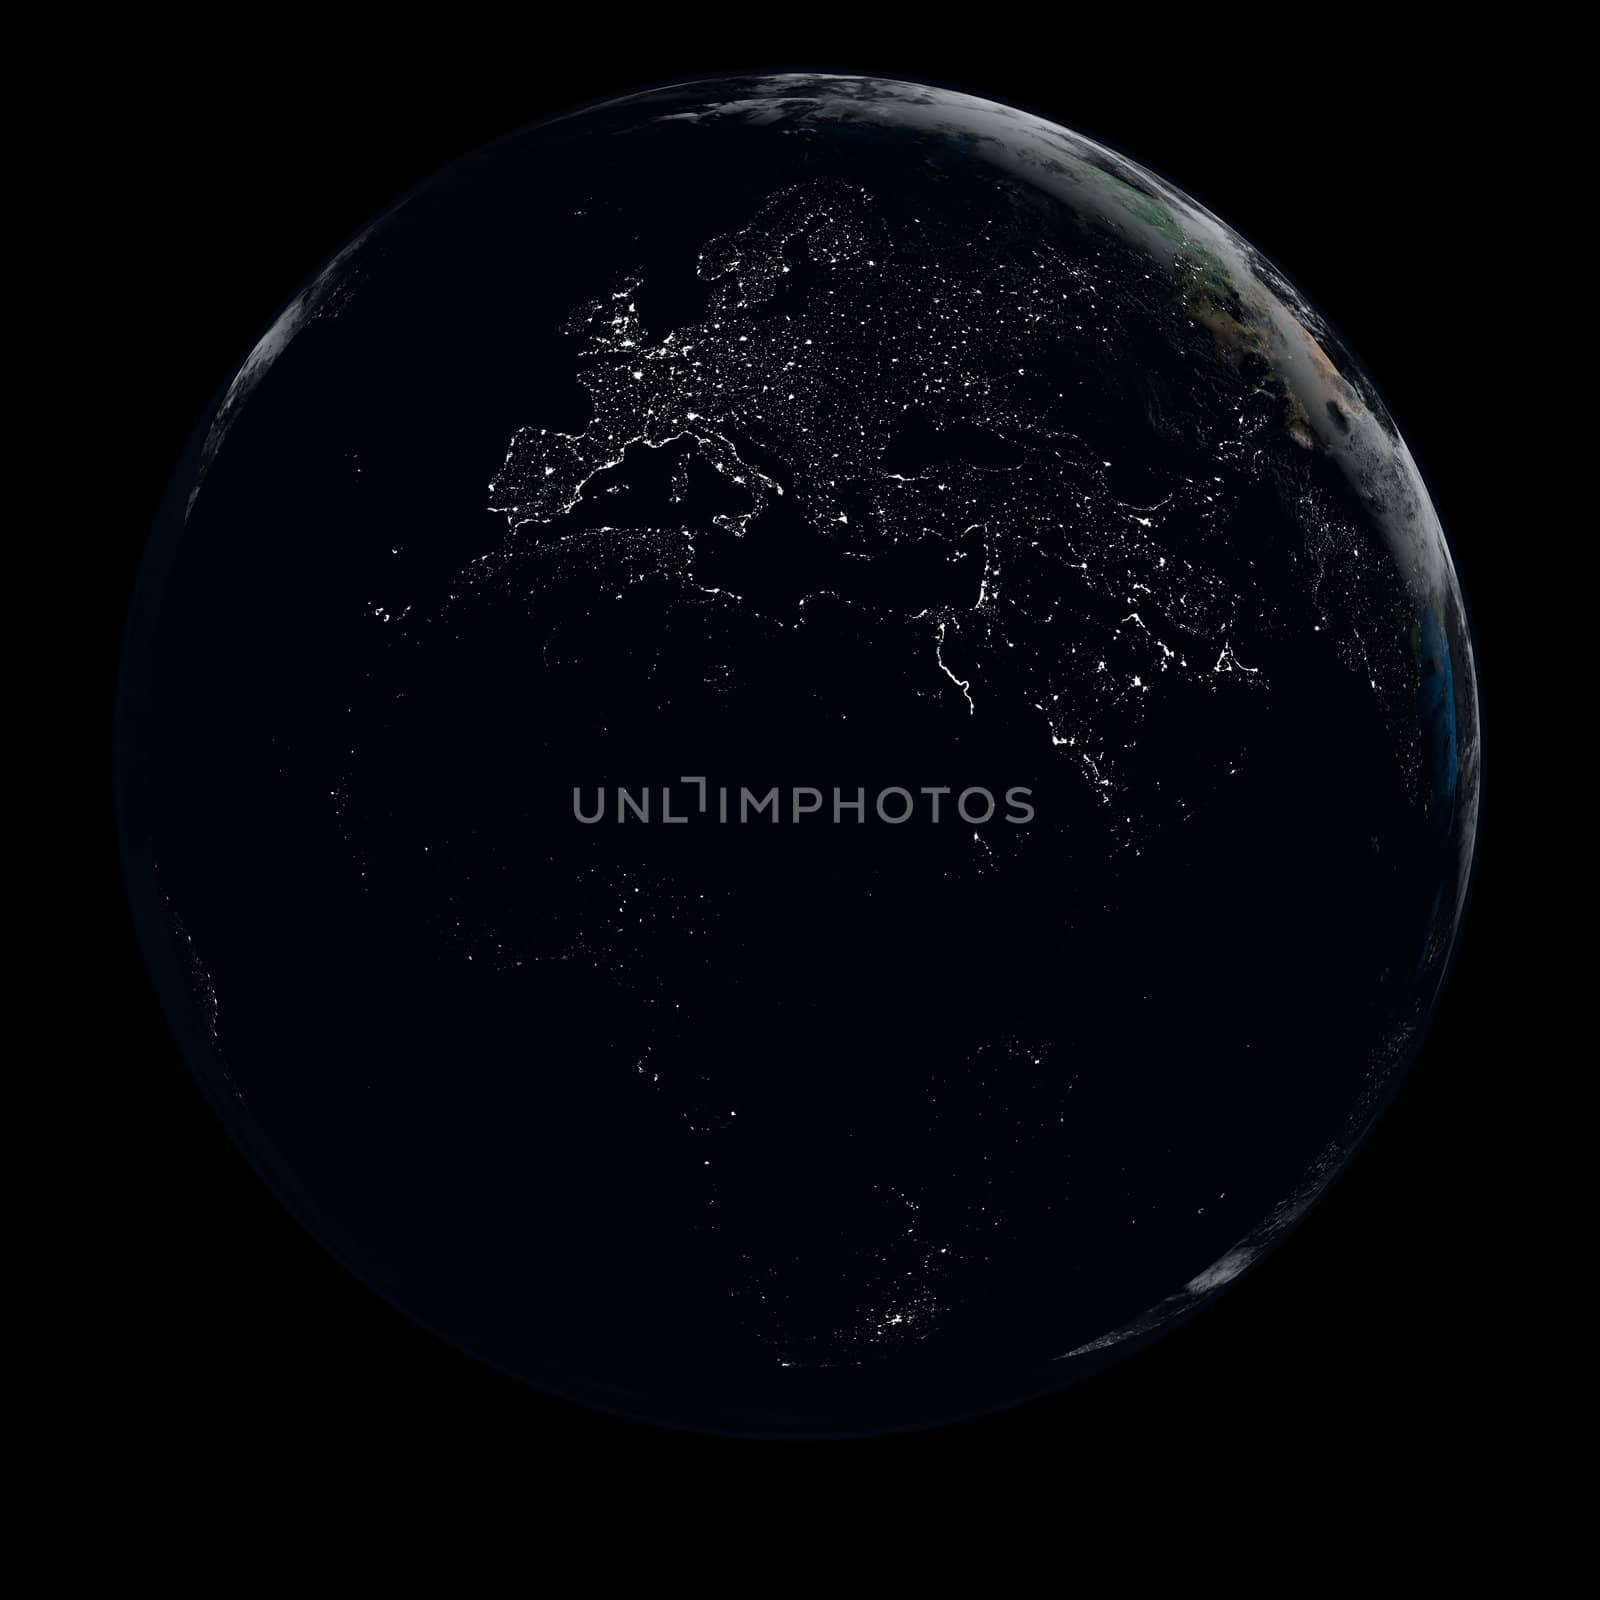 Earth at night by Harvepino